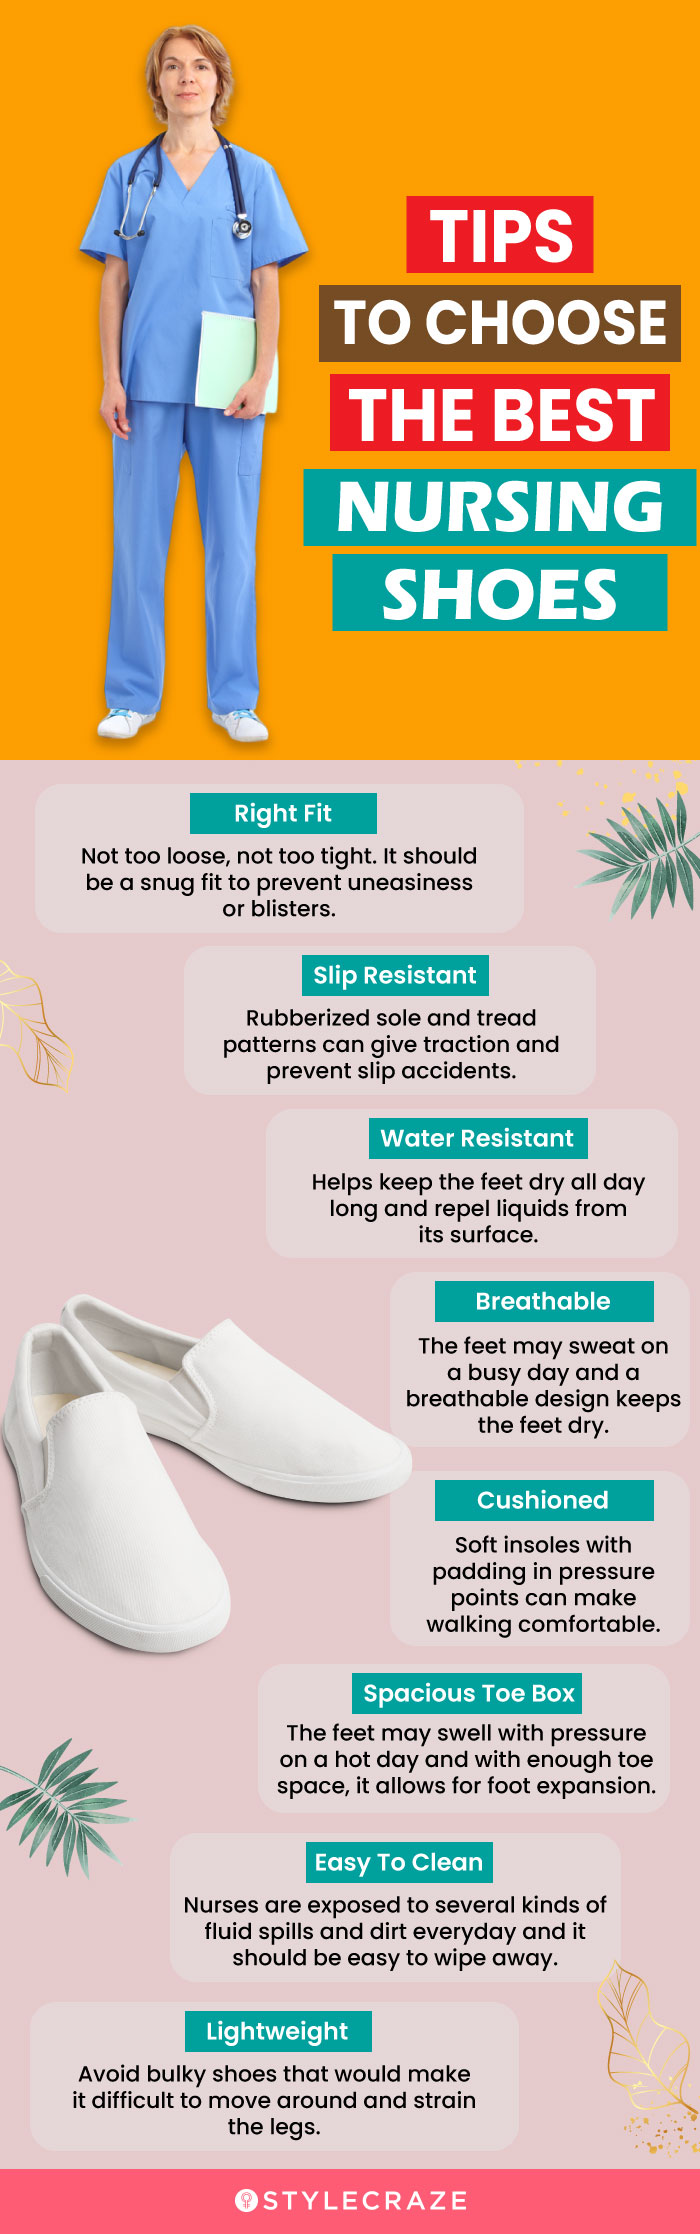 Tips To Choose The Best Nursing Shoes (infographic)